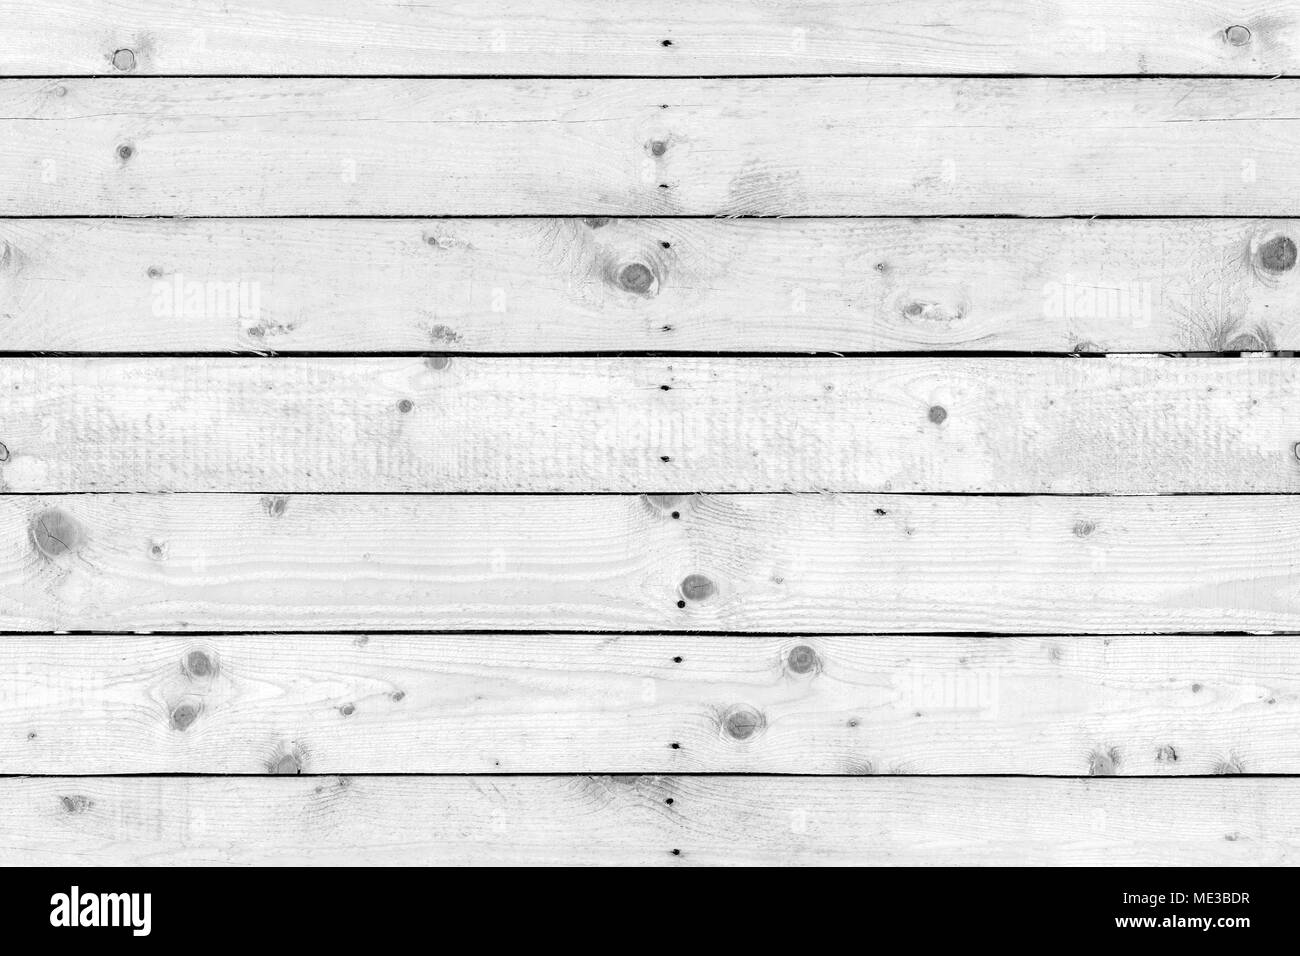 White wooden wall made of pine wood boards, seamless flat background photo texture Stock Photo